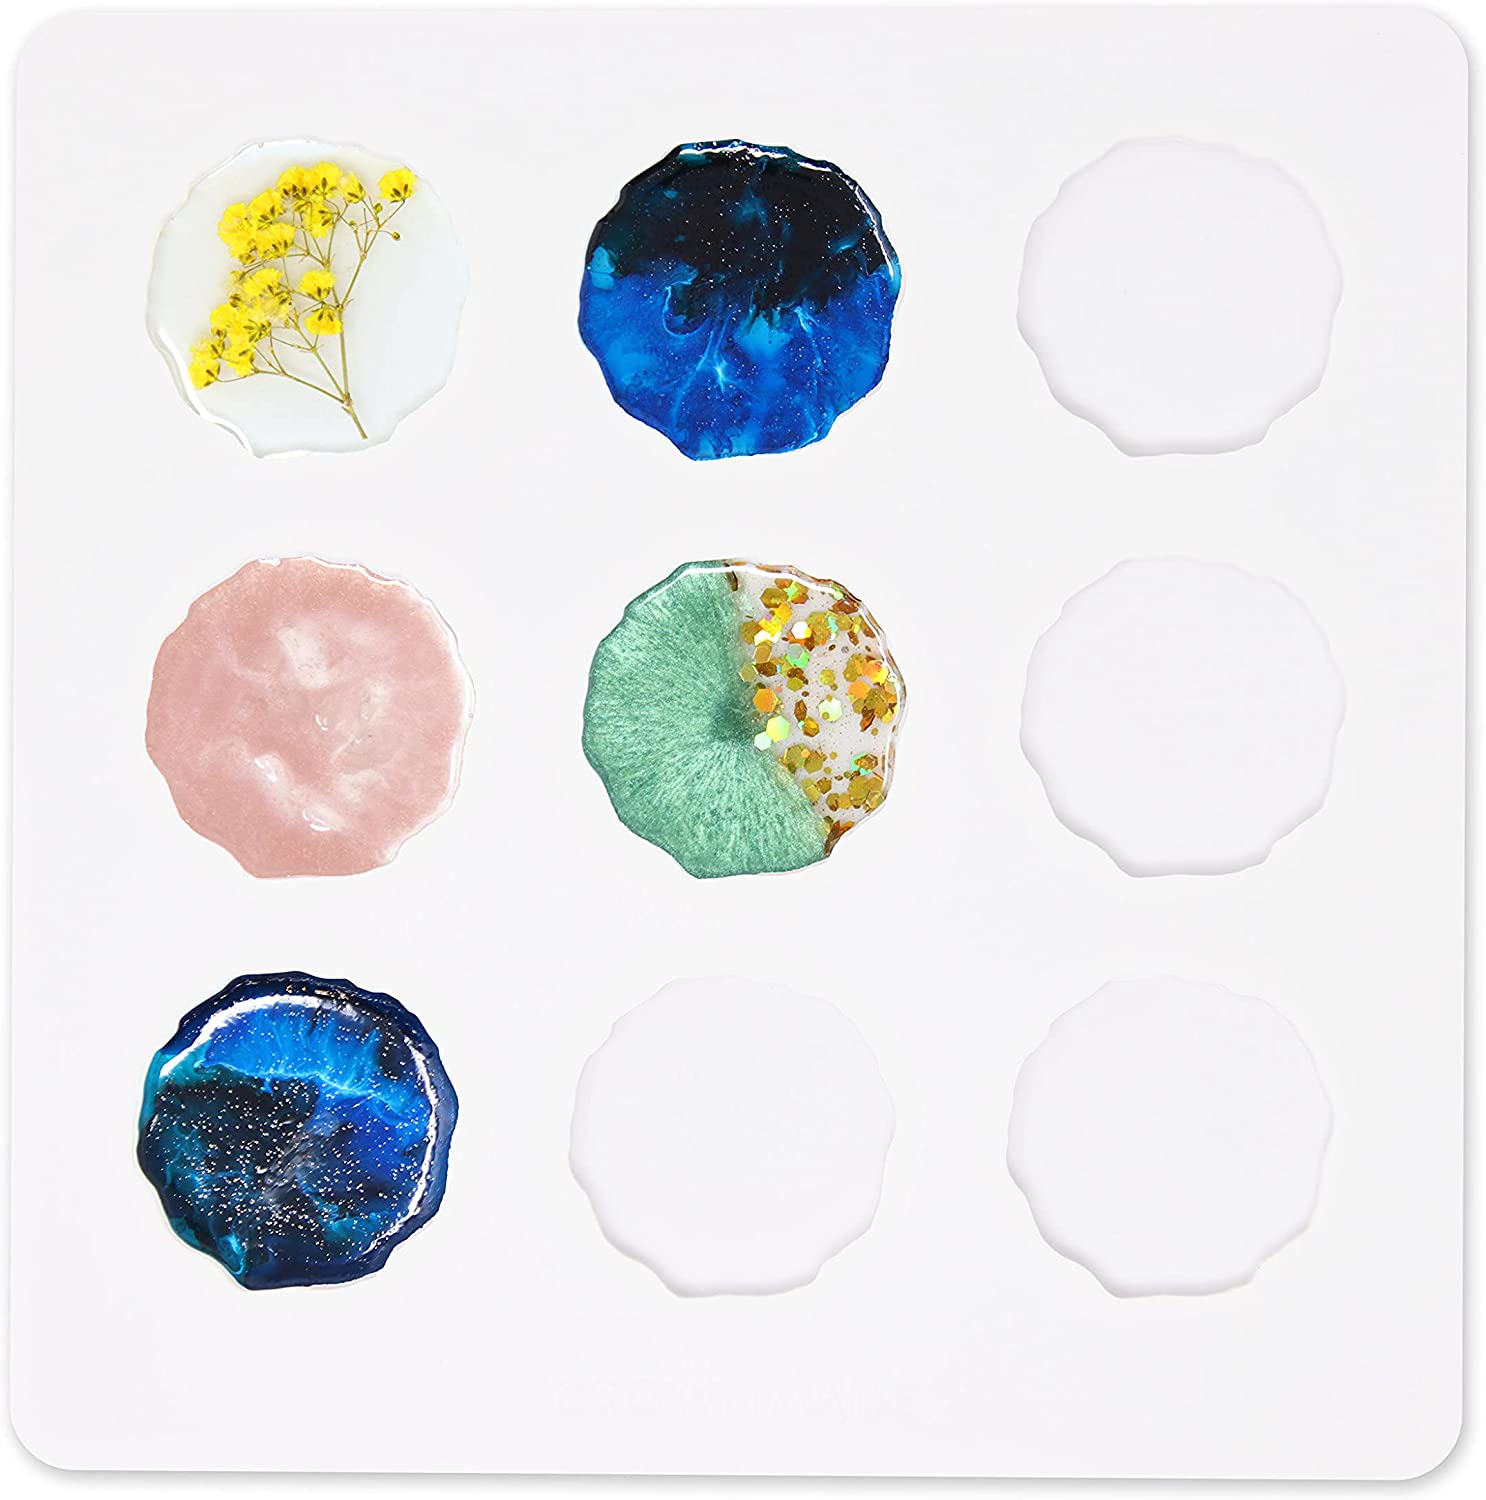 CROWNMADE Mini Geode Silicone Resin Molds Keychain Molds for Epoxy Resin with 9 Irregular Round Cavities – Resin Jewelry Molds, Resin Keychain Molds – Unique Pop Socket Mold, Phone Grip Mold